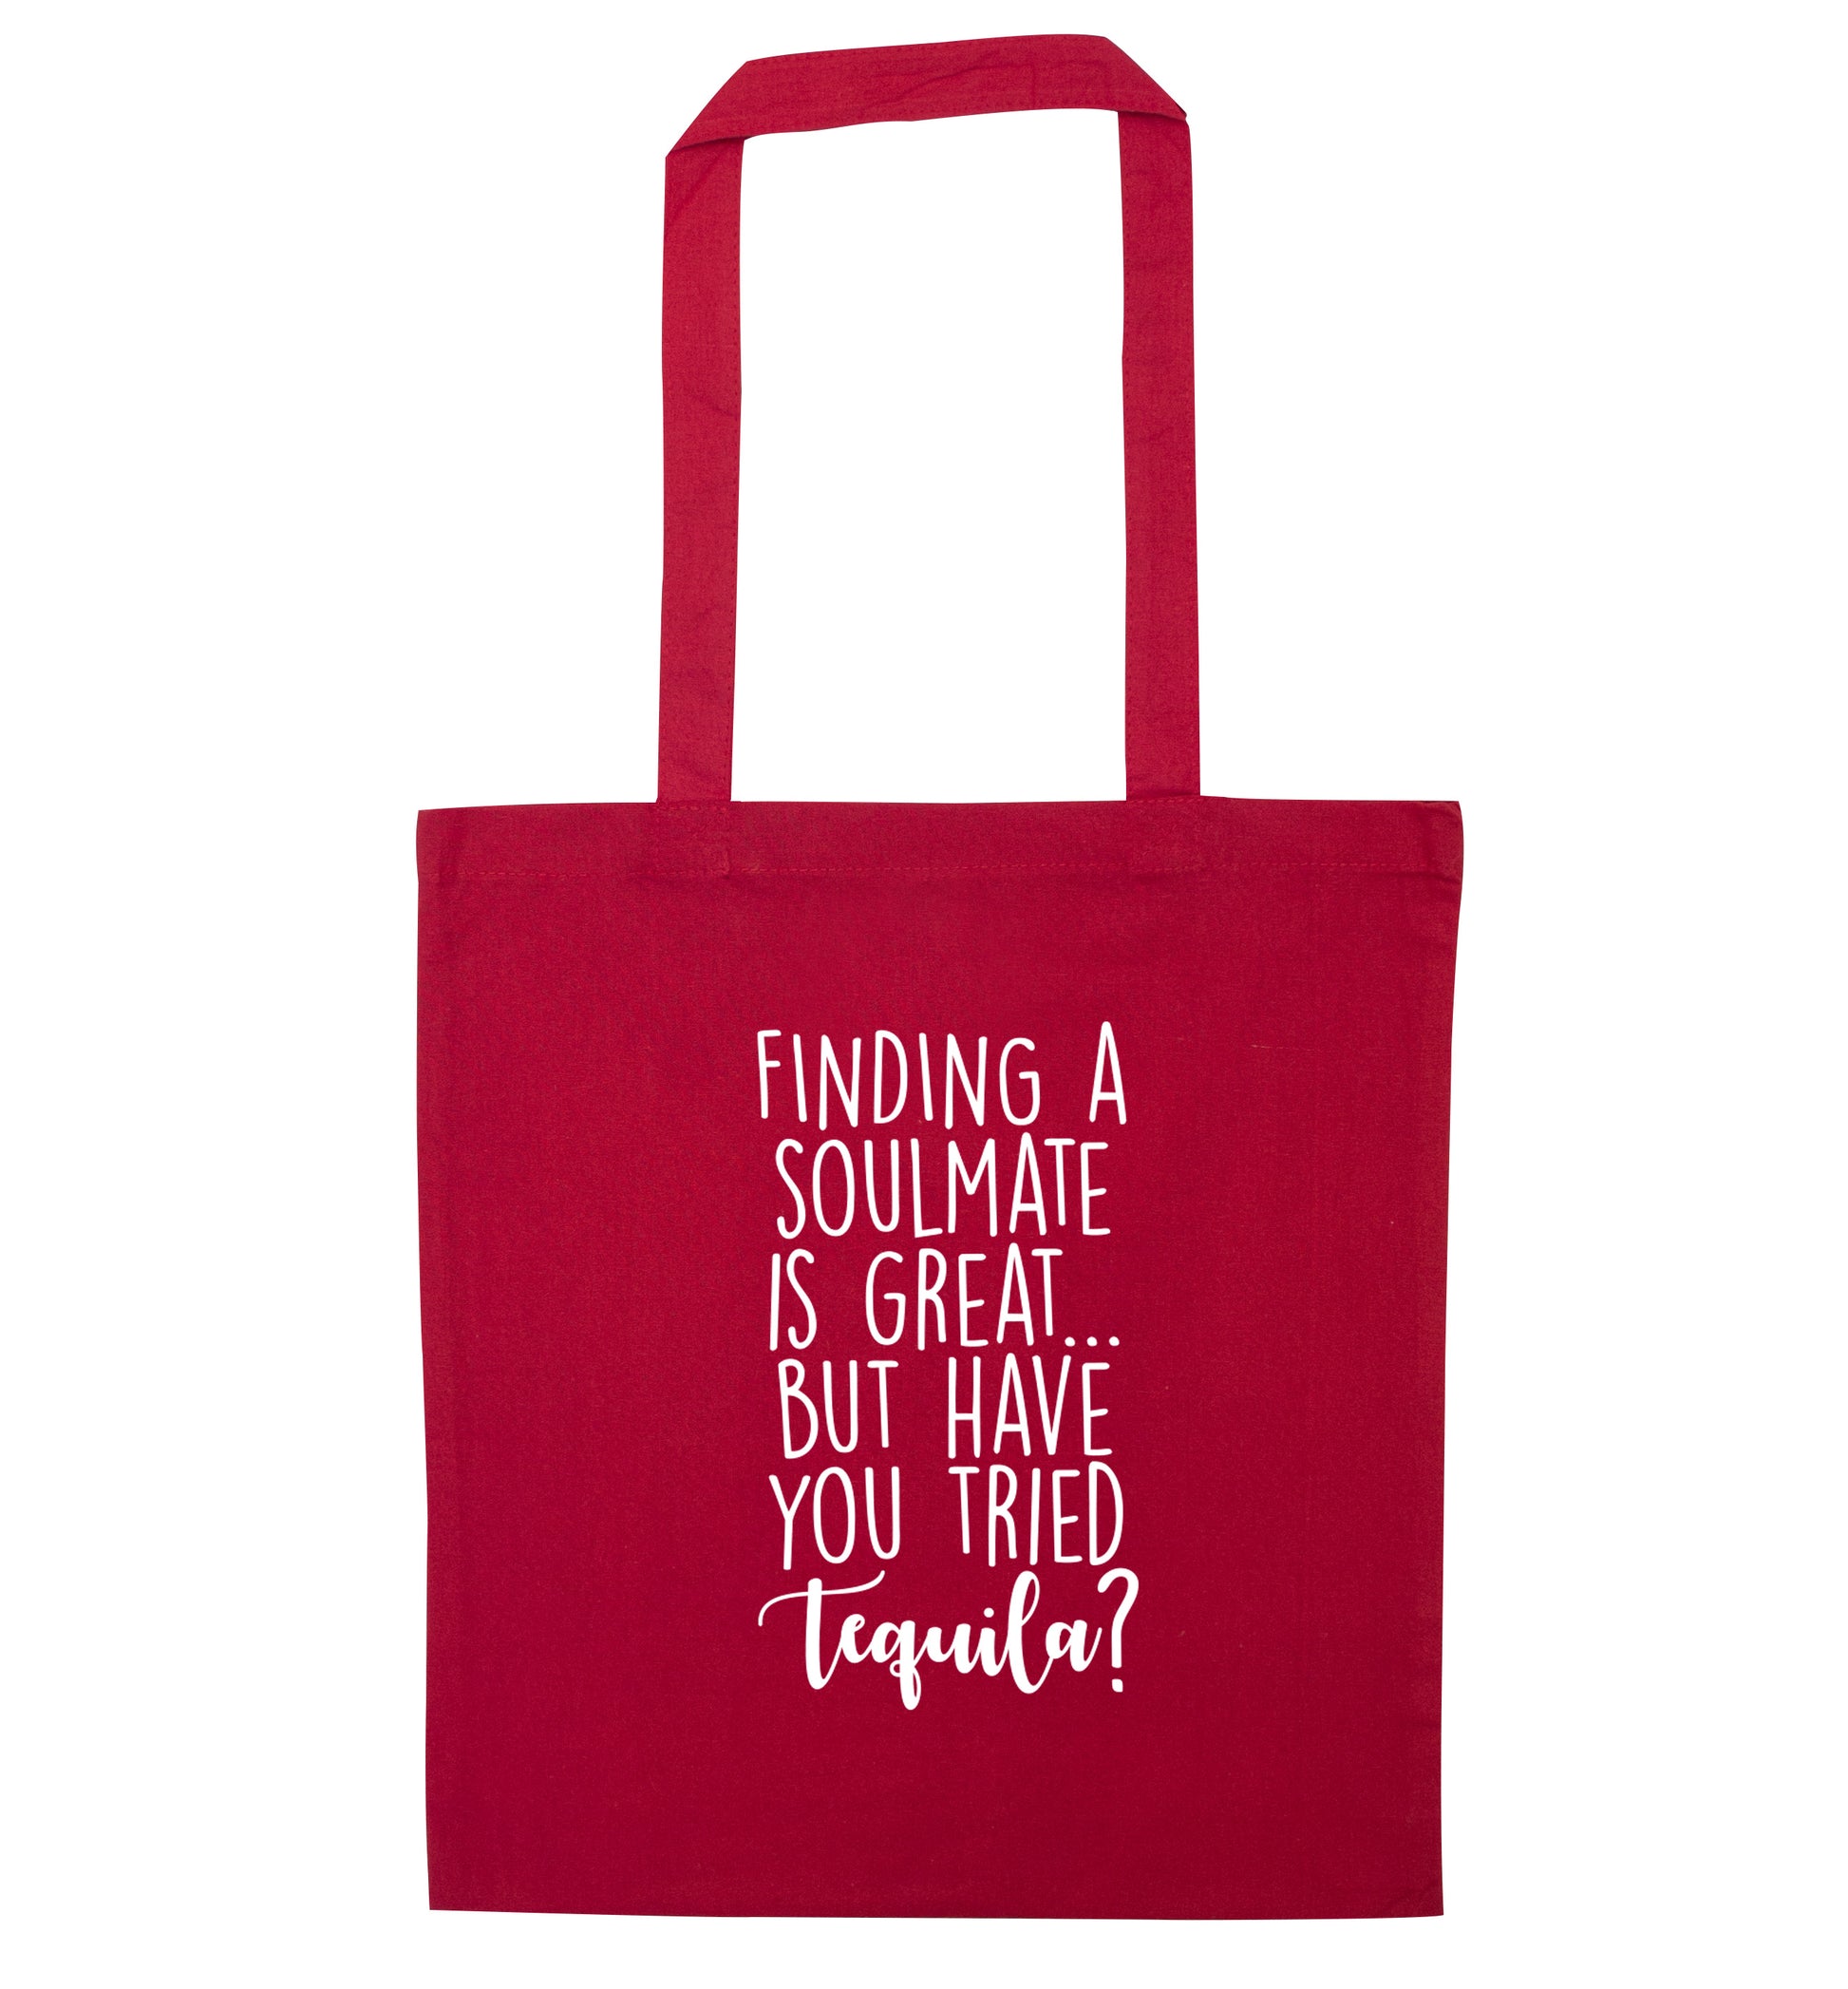 Finding a soulmate is great but have you tried tequila? red tote bag